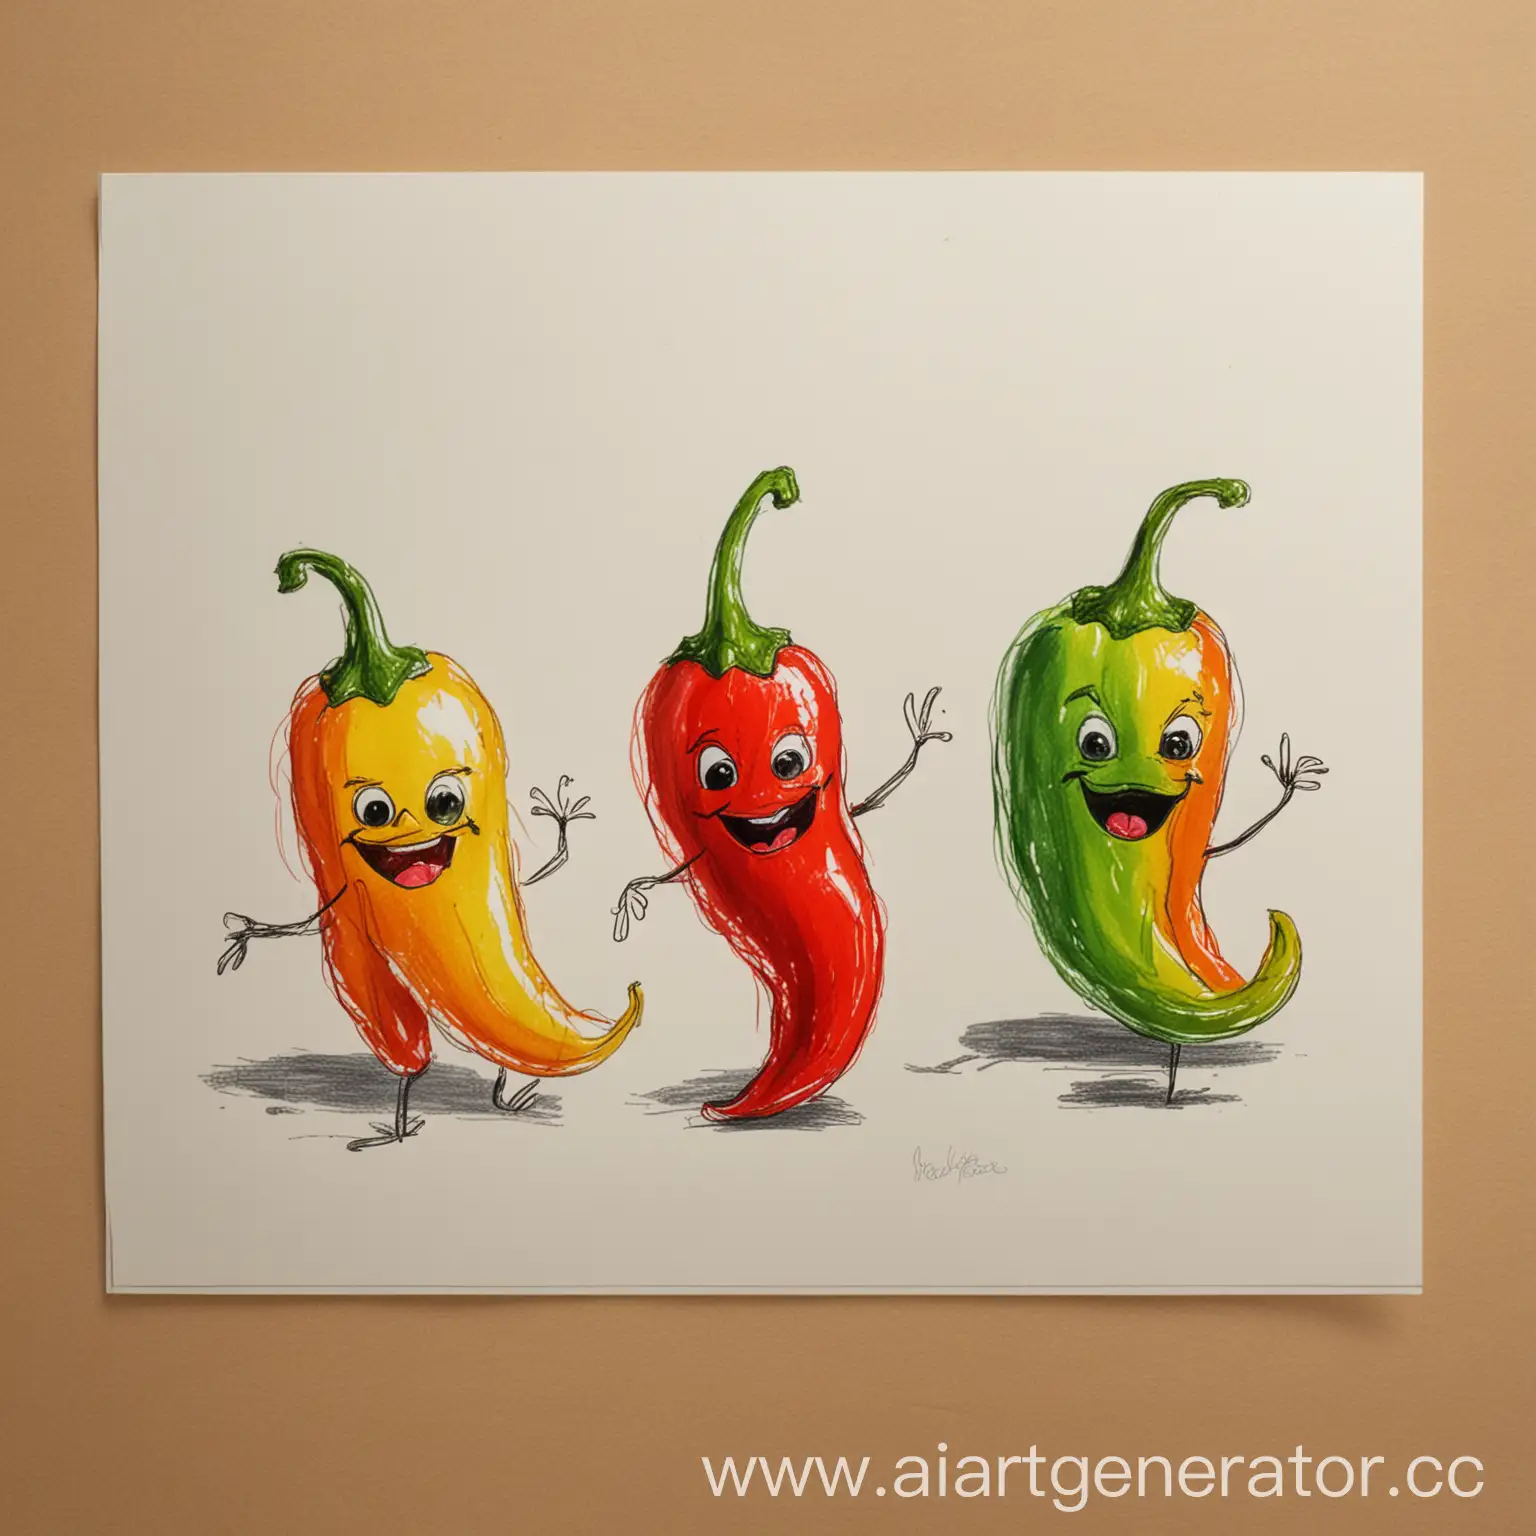 Childrens-Drawing-of-Cool-Peppers-Imaginative-Artwork-by-Young-Artists